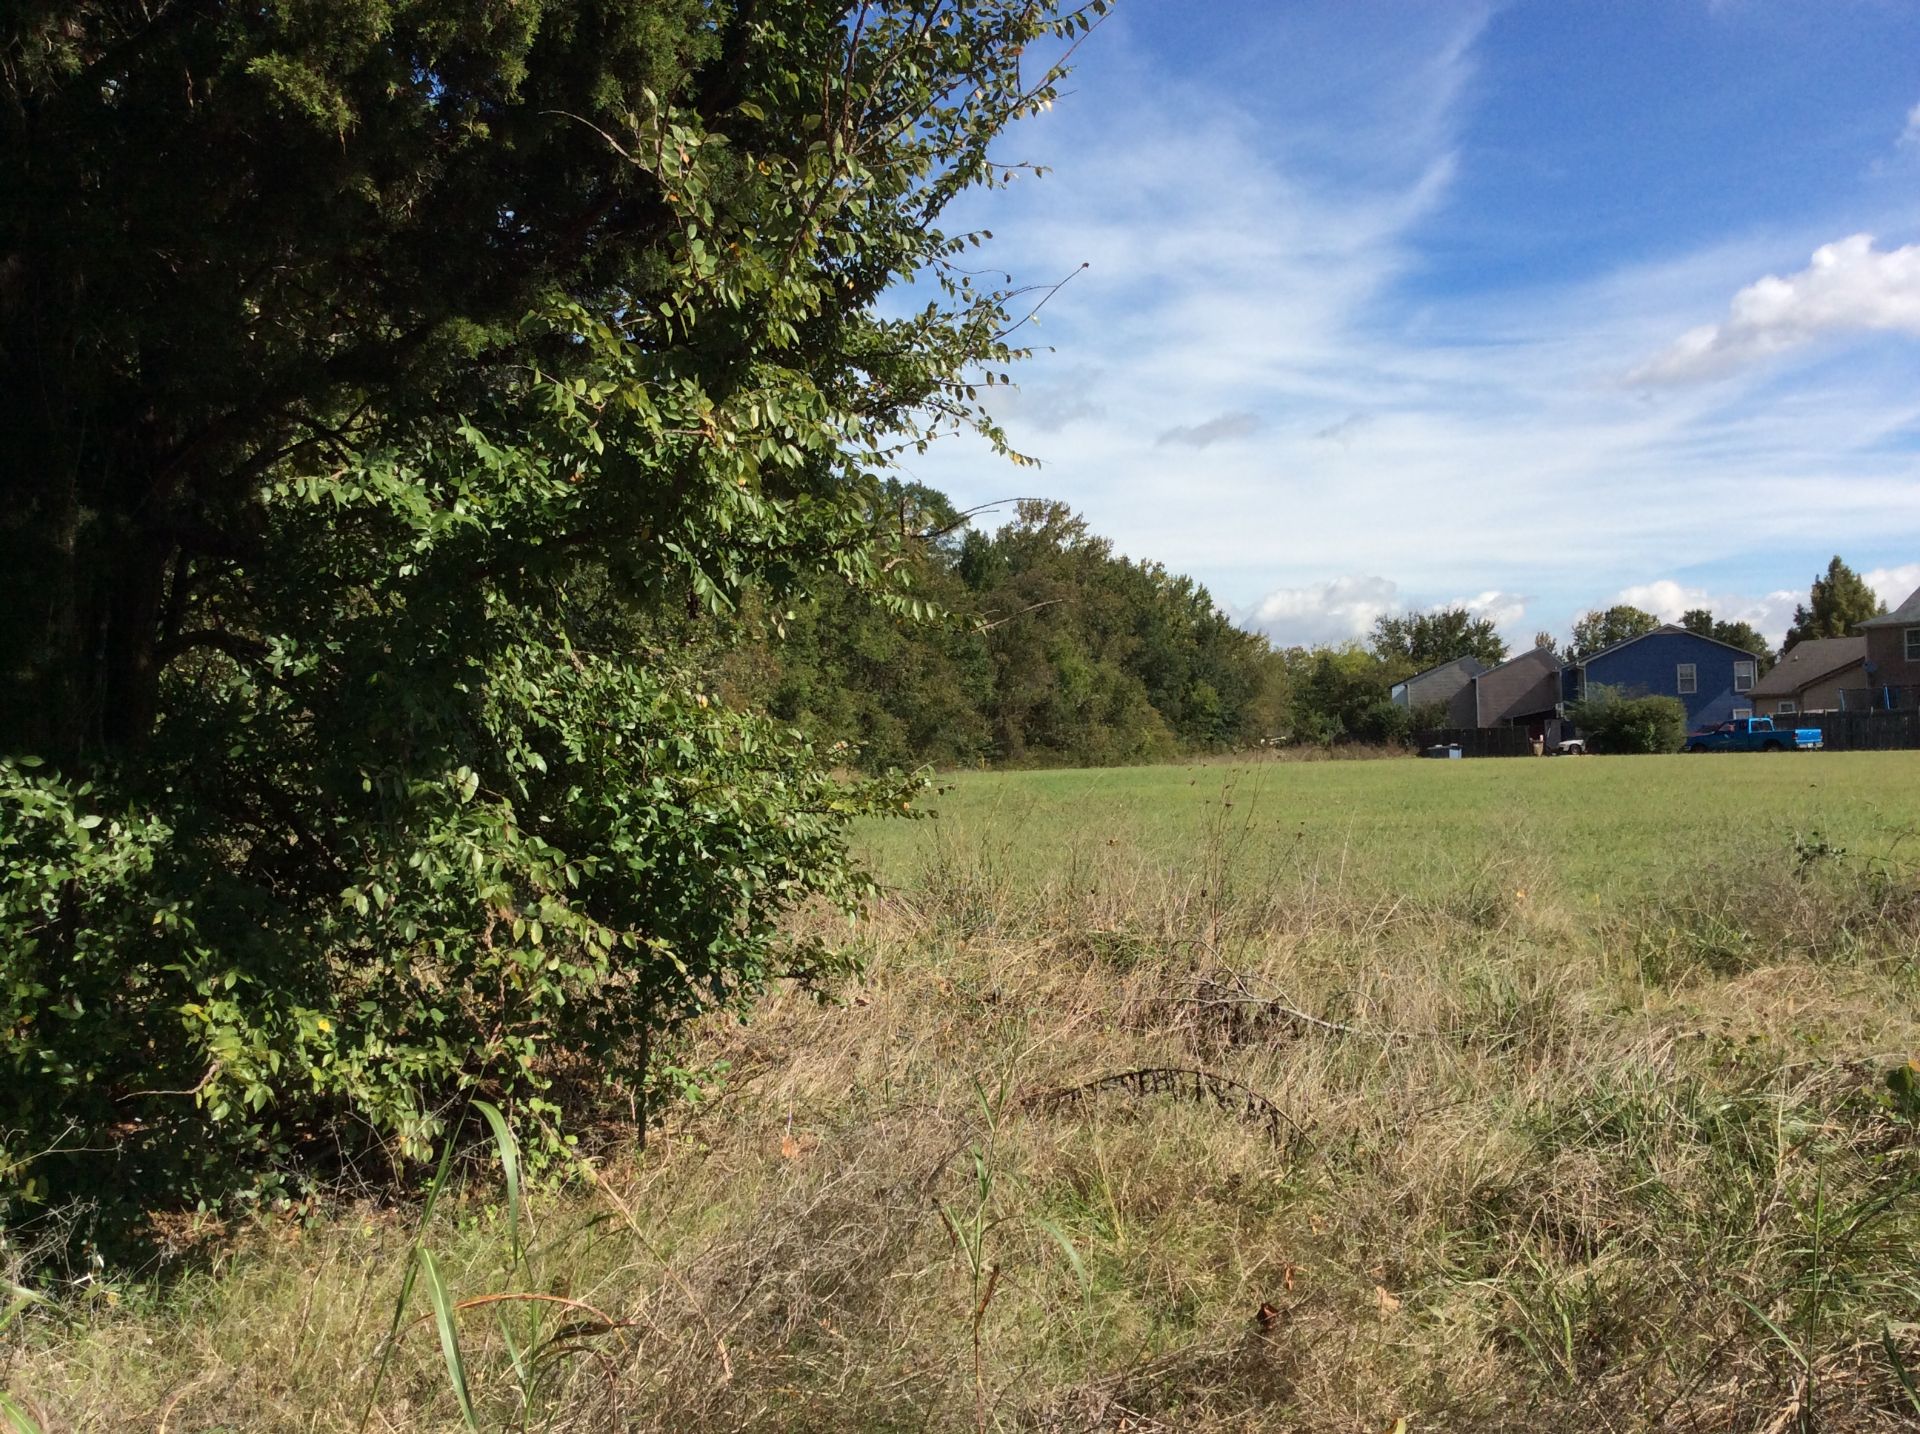 6 Acres± Commerical Lot - Hemingway Drive Decatur, Alabama.  The property is currently zoned R-6. - Image 6 of 7